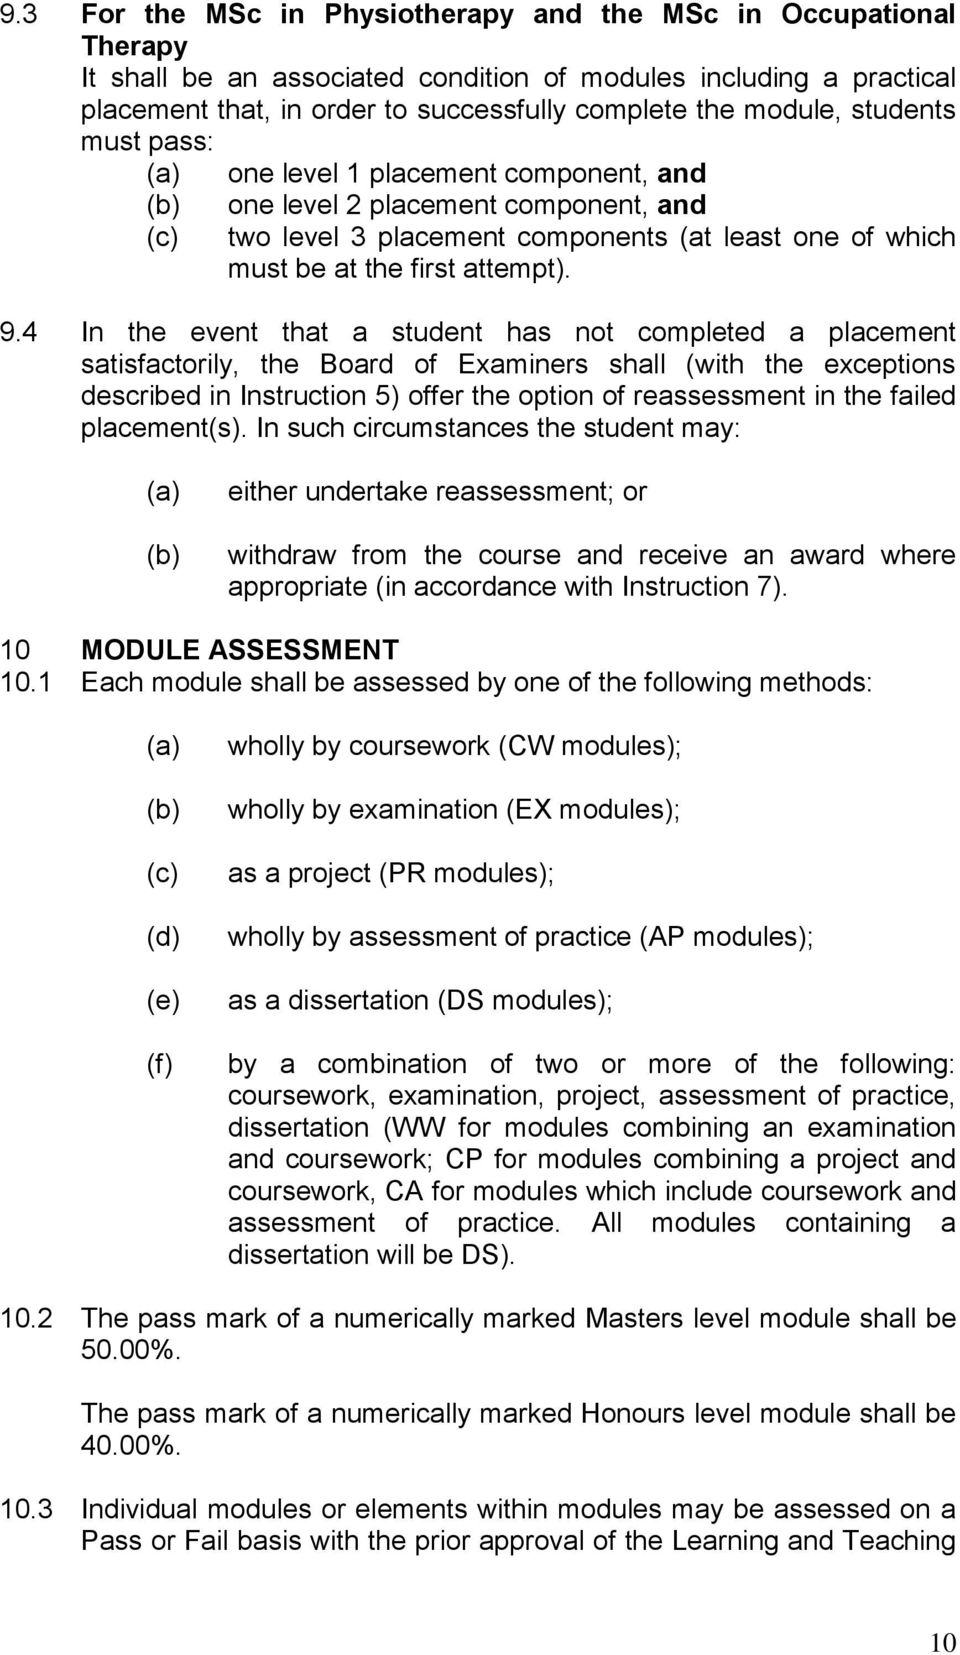 4 In the event that a student has not completed a placement satisfactorily, the Board of Examiners shall (with the exceptions described in Instruction 5) offer the option of reassessment in the